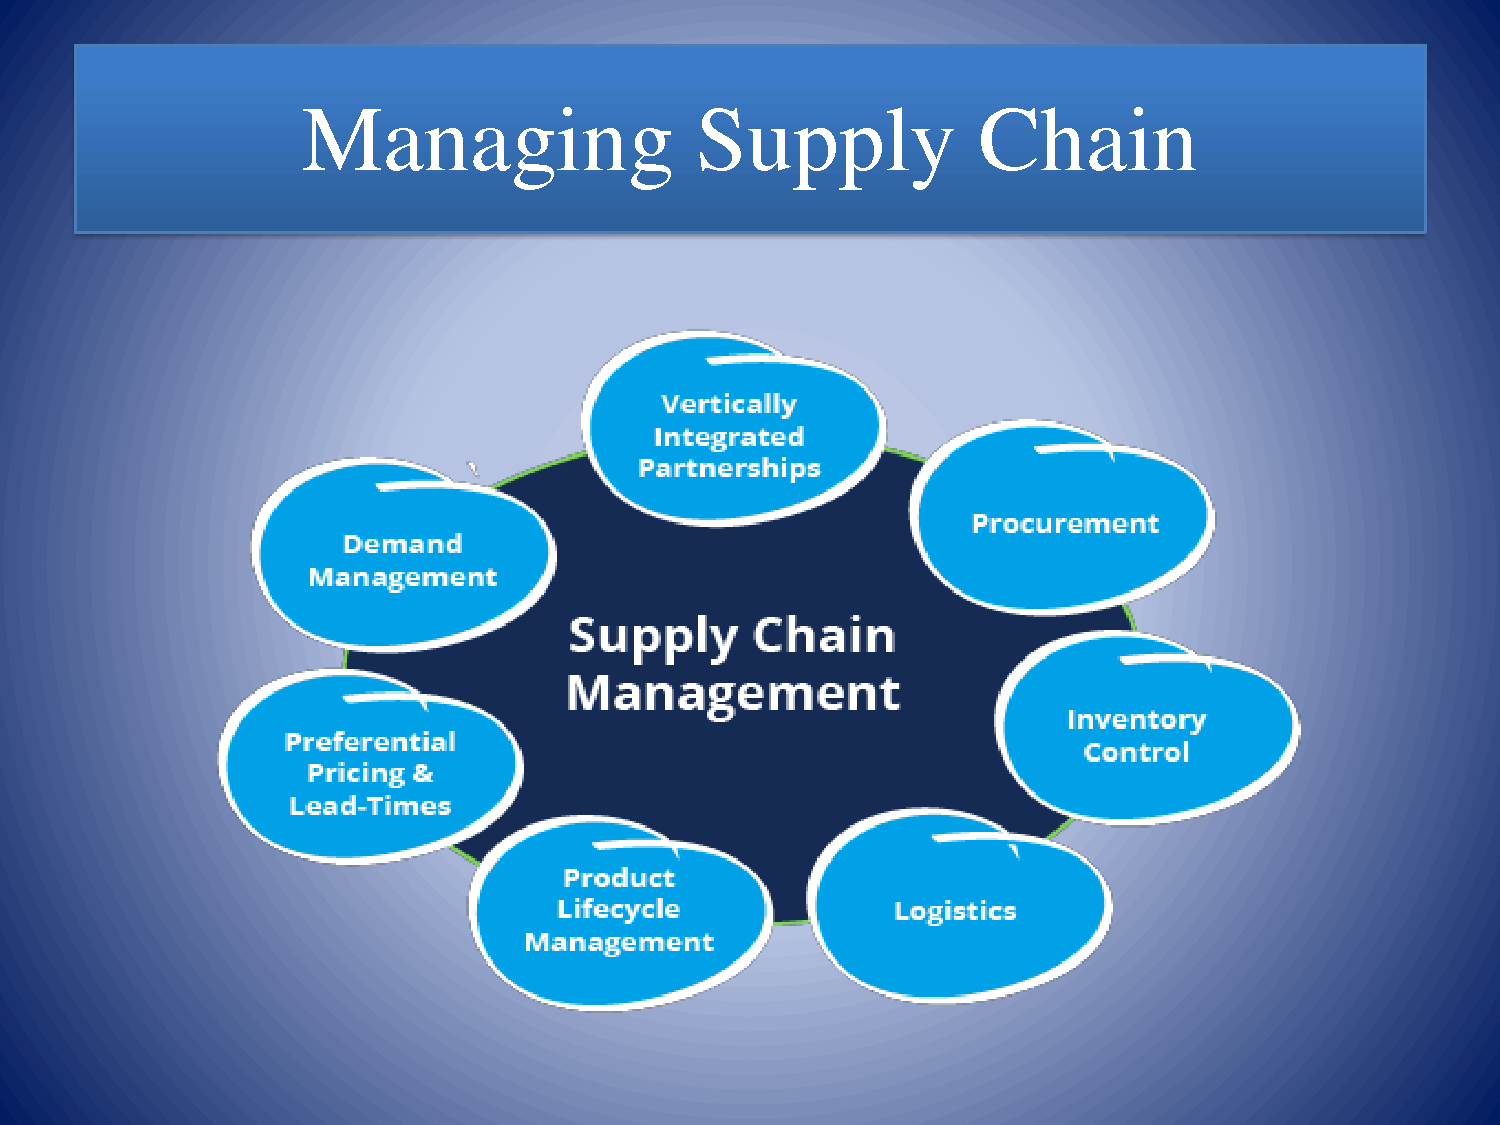 Image above shows Supply Chain Complexity Solutions